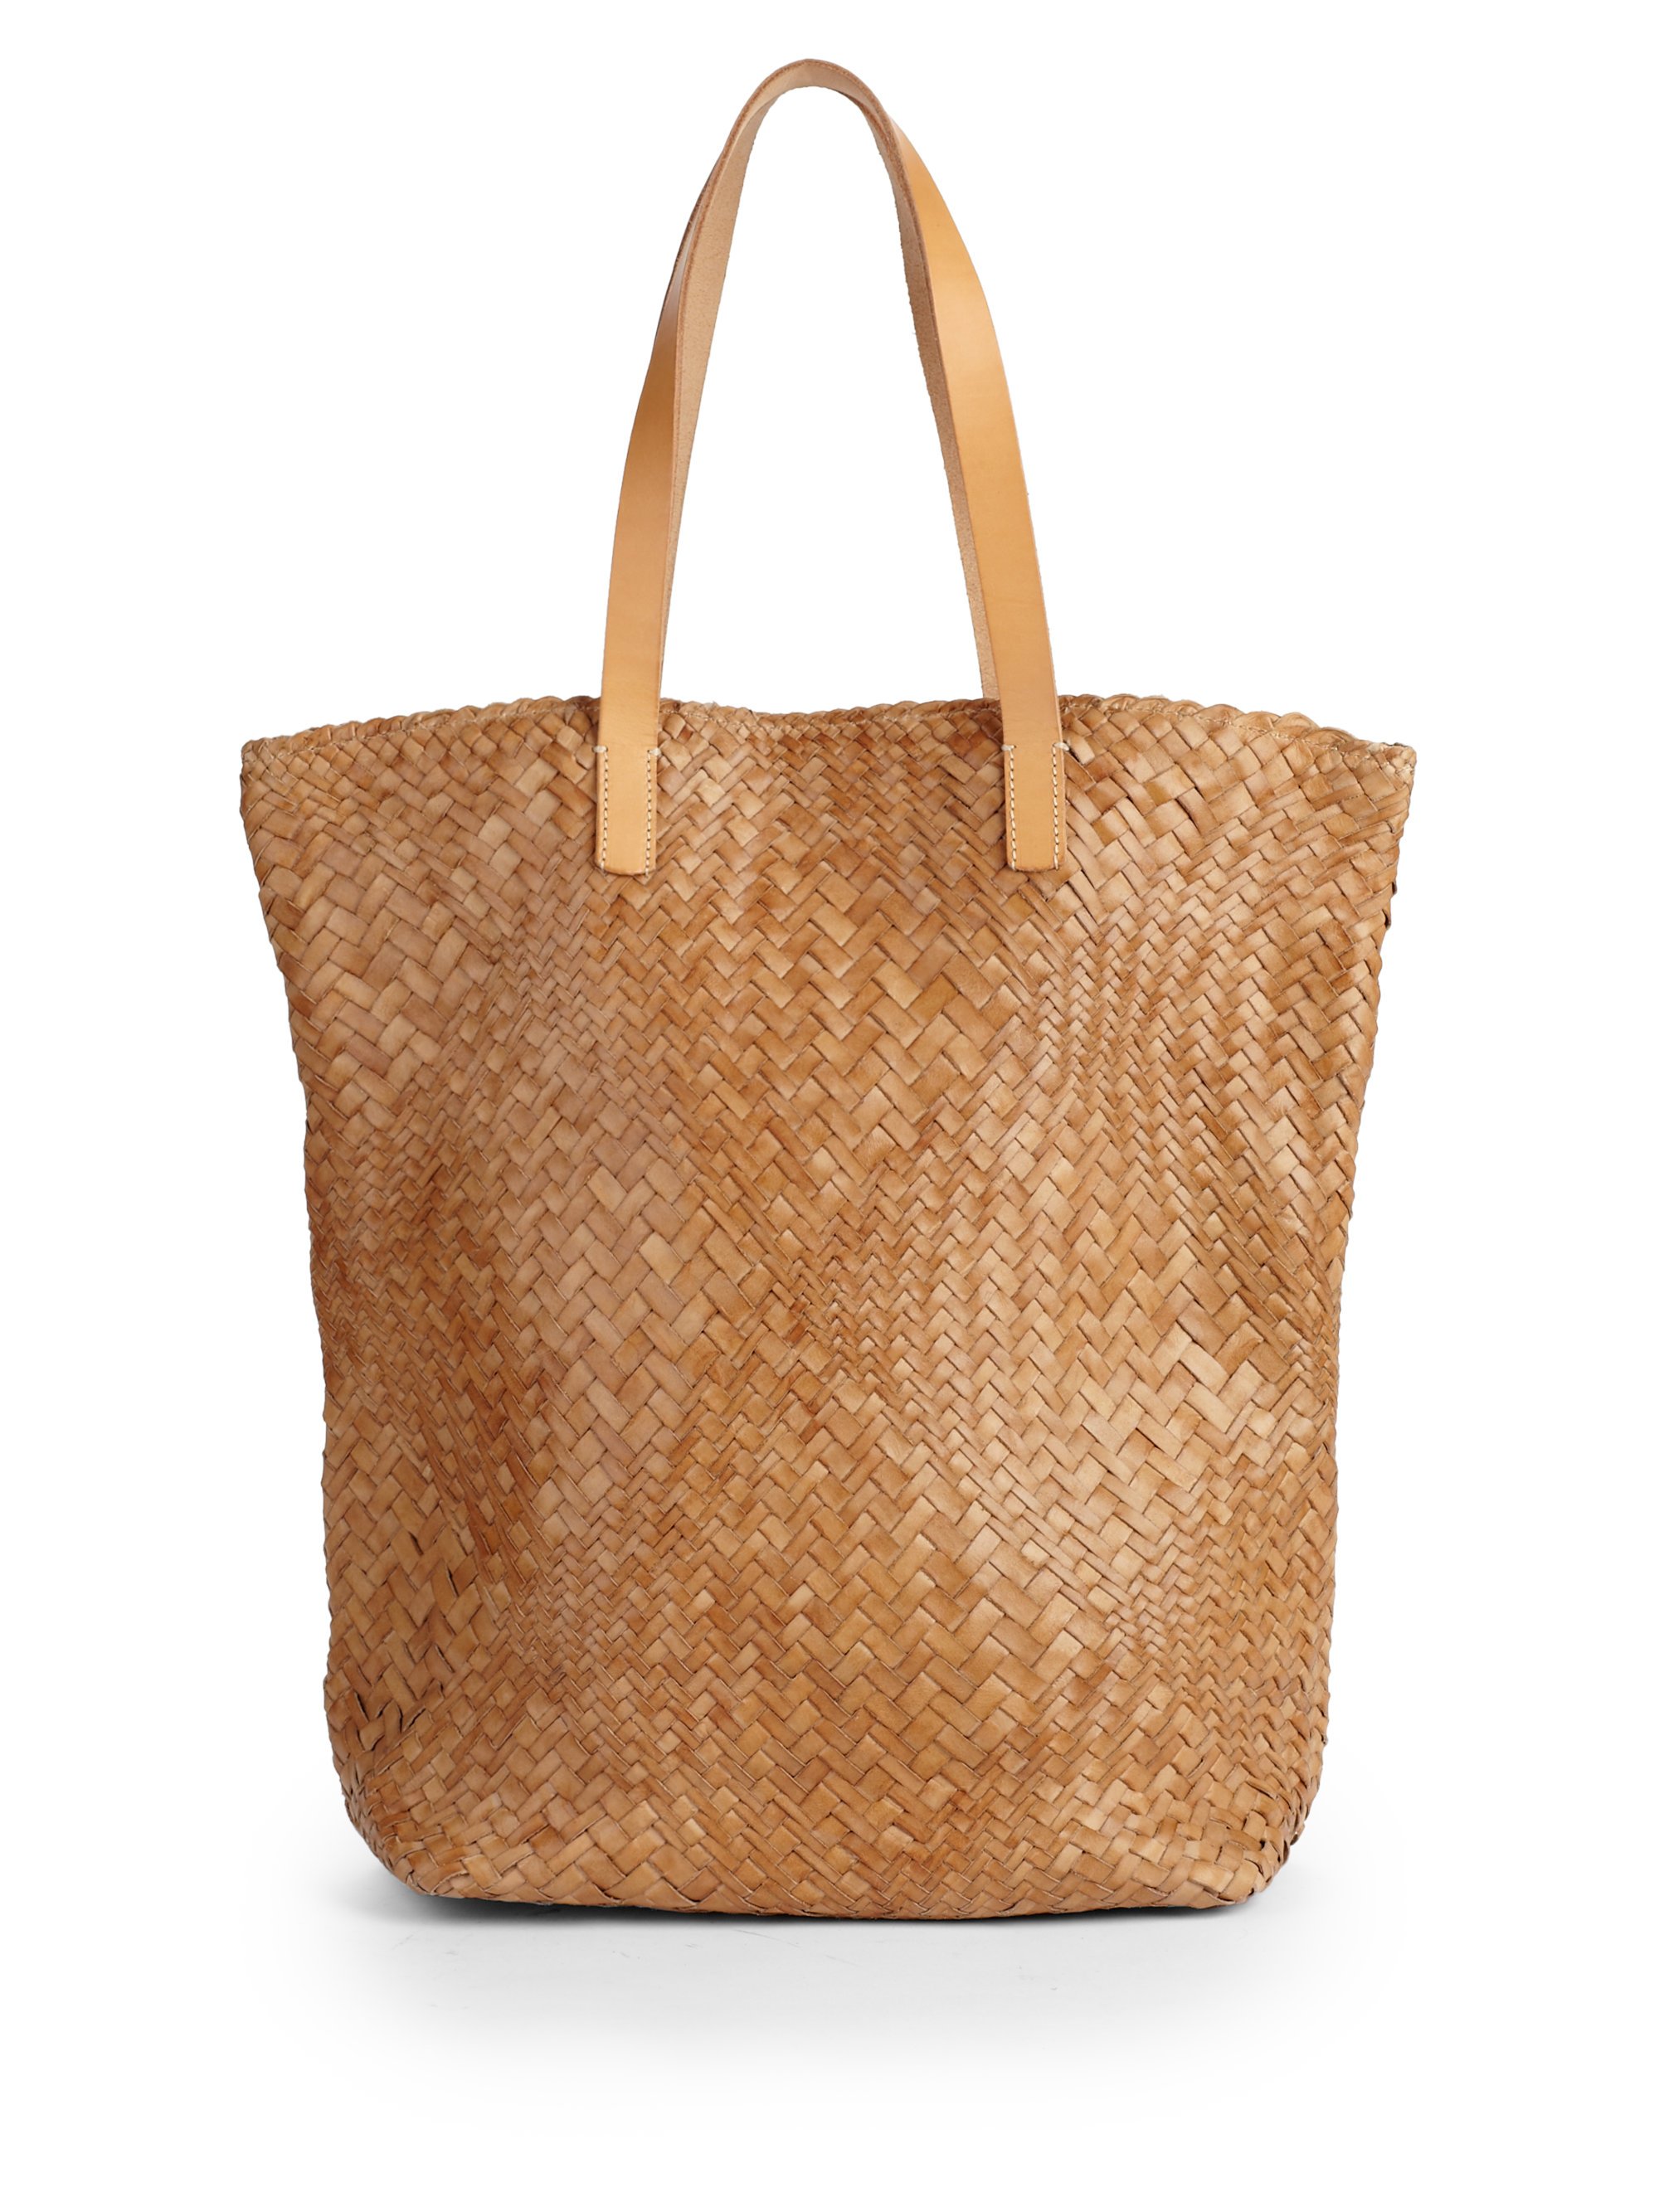 Massimo Palomba Cancun Woven Leather Tote in Brown (taupe)